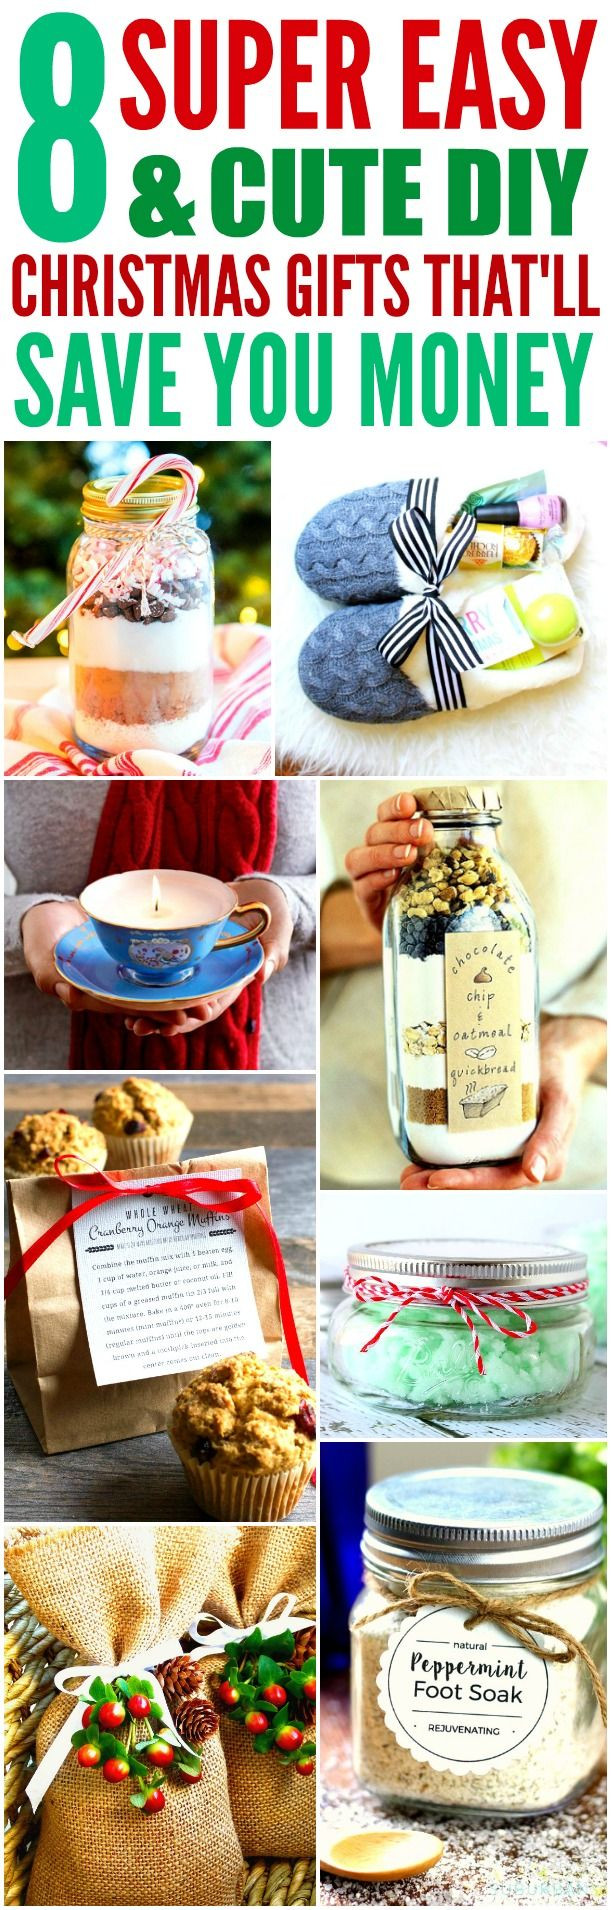 Cute DIY Christmas Gifts
 Best 25 Small ts for friends ideas on Pinterest